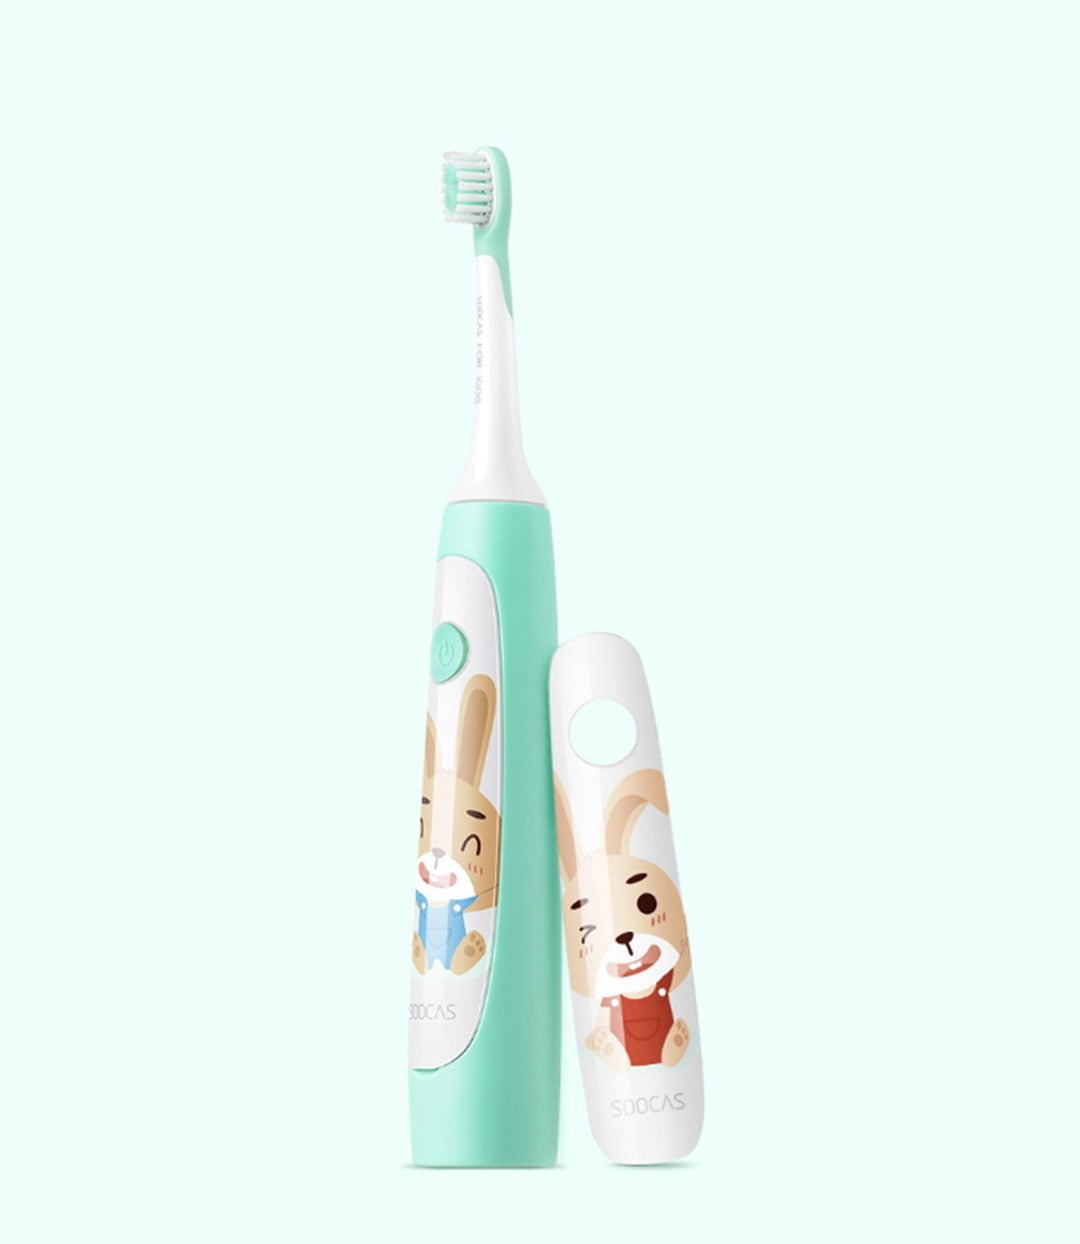 00Des Xiaomi Soocas Kids Electric Toothbrush Xiaomi &Amp;Lt;Div Class=&Amp;Quot;Product-Description&Amp;Quot;&Amp;Gt;The Capacity Of Soocas Children'S Toothbrush Battery Is 800 Mah, Which Can Be Used For Up To 20 Days At A Frequency Of 2 Minutes Per Day For 2 Times.&Amp;Lt;/Div&Amp;Gt; Soocas Kids Sonic Electric Toothbrush Soocas Kids Sonic Electric Toothbrush